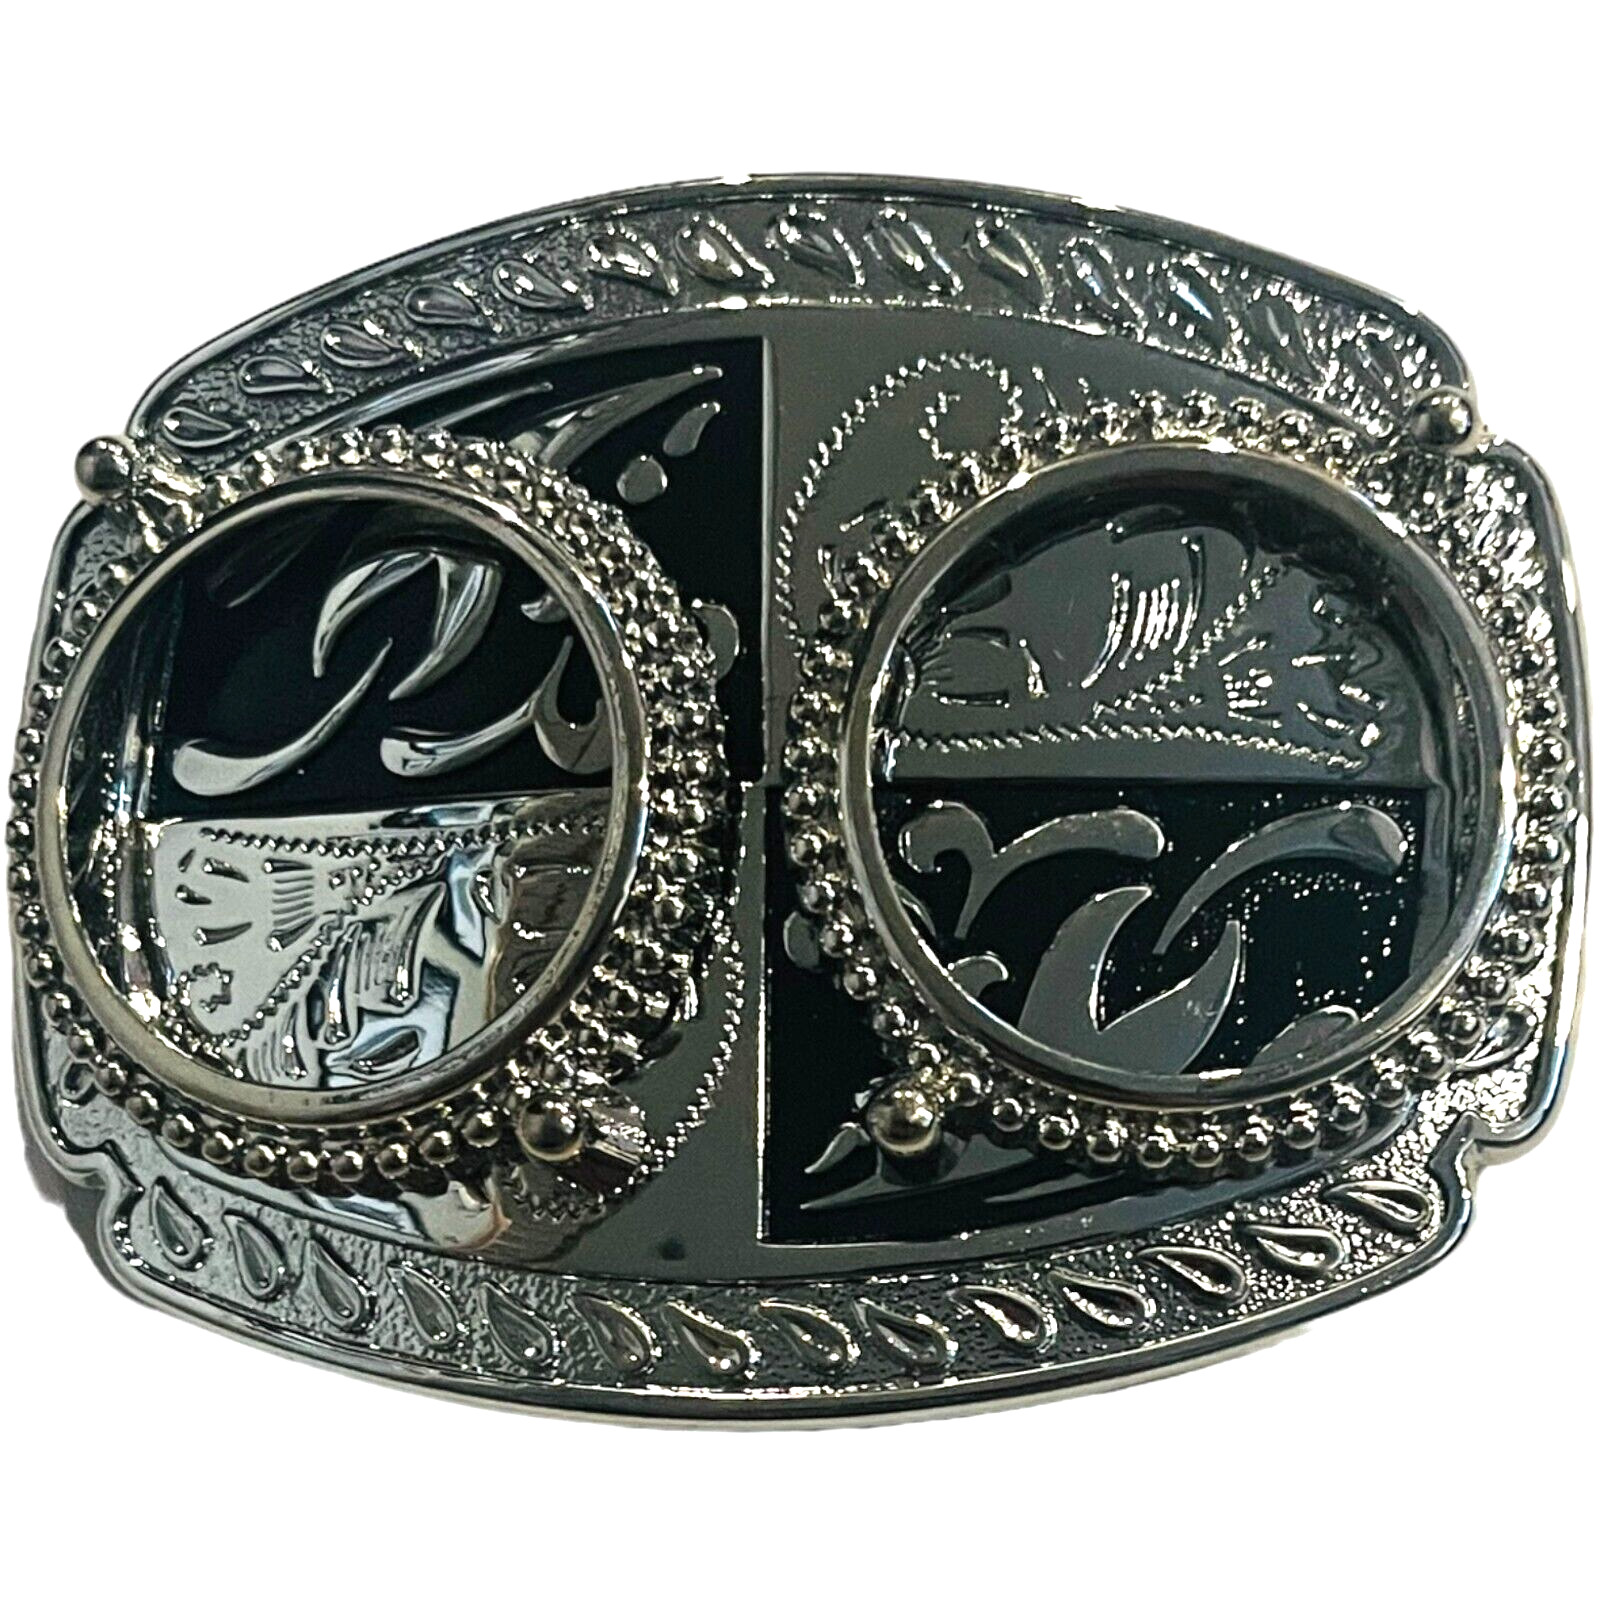 Western Belt Buckle for 2 Silver Dollars or 39 MM Stones - Silver and Black